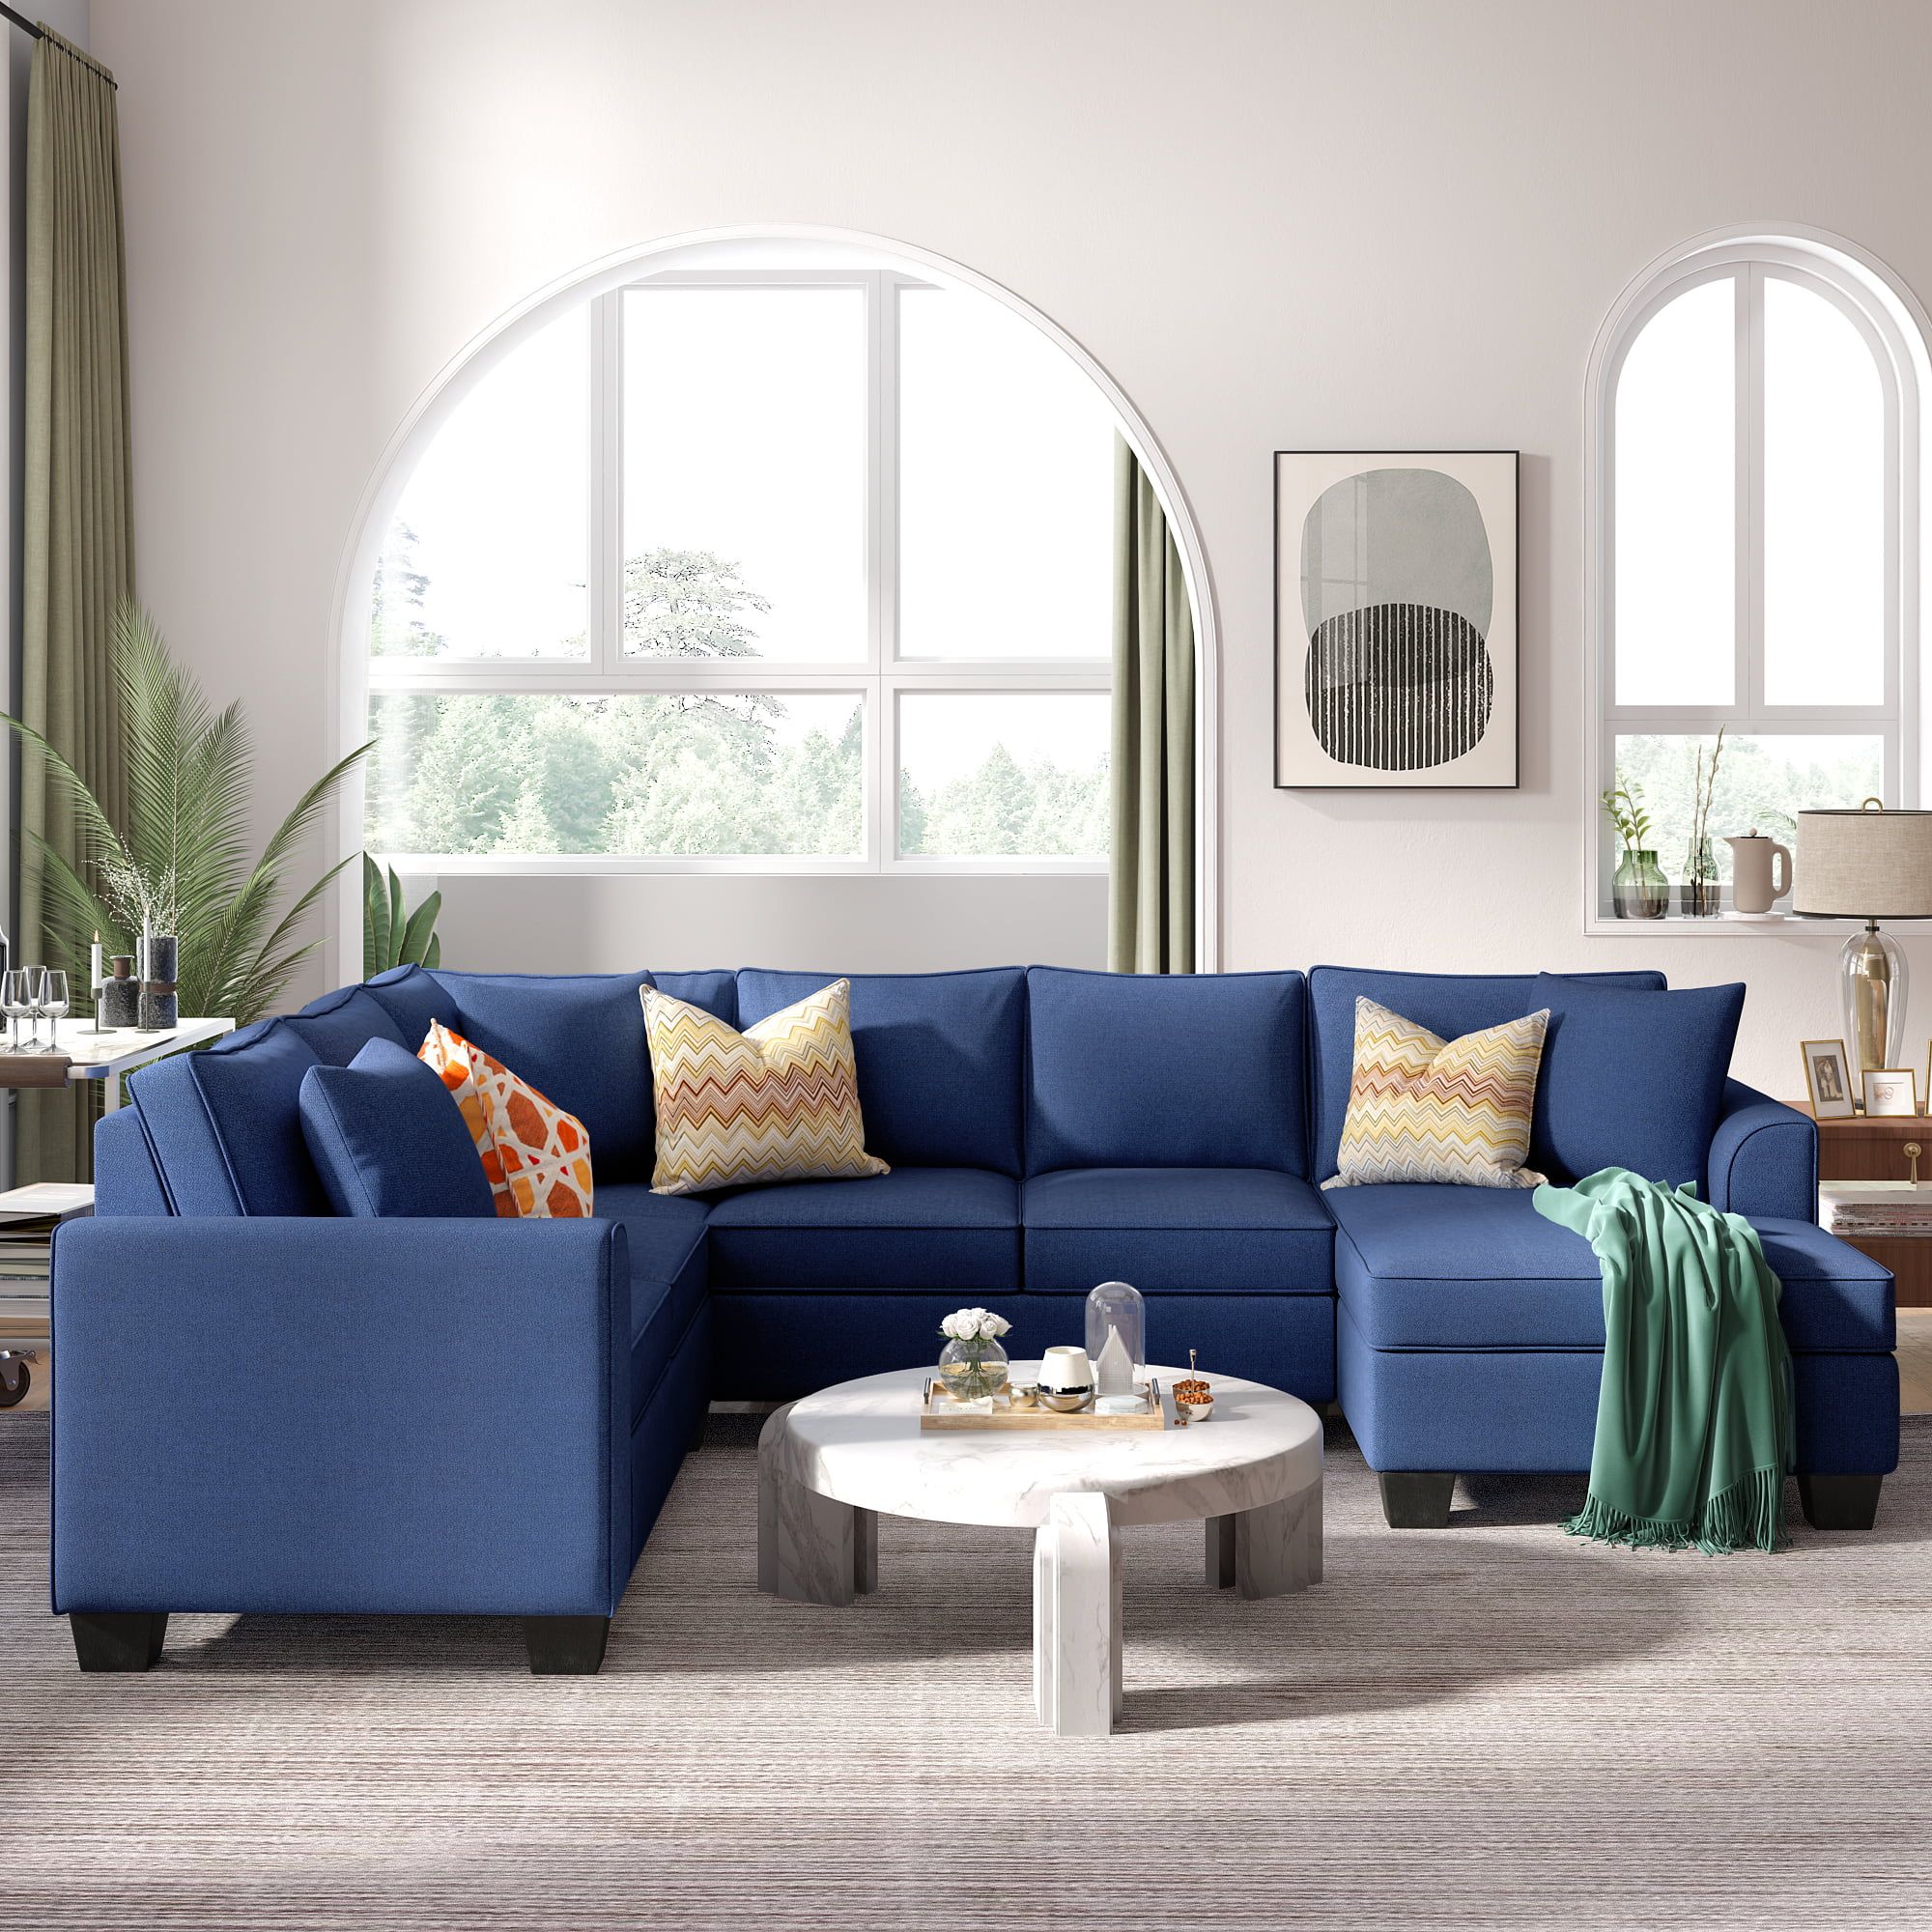 7 Seater Sectional Sofa Sets, Upholstered Modern U Shaped Sofa With 3  Pillows For Living Room, Blue – Walmart Intended For 7 Seater Sectional Couch With Ottoman And 3 Pillows (Photo 14 of 15)